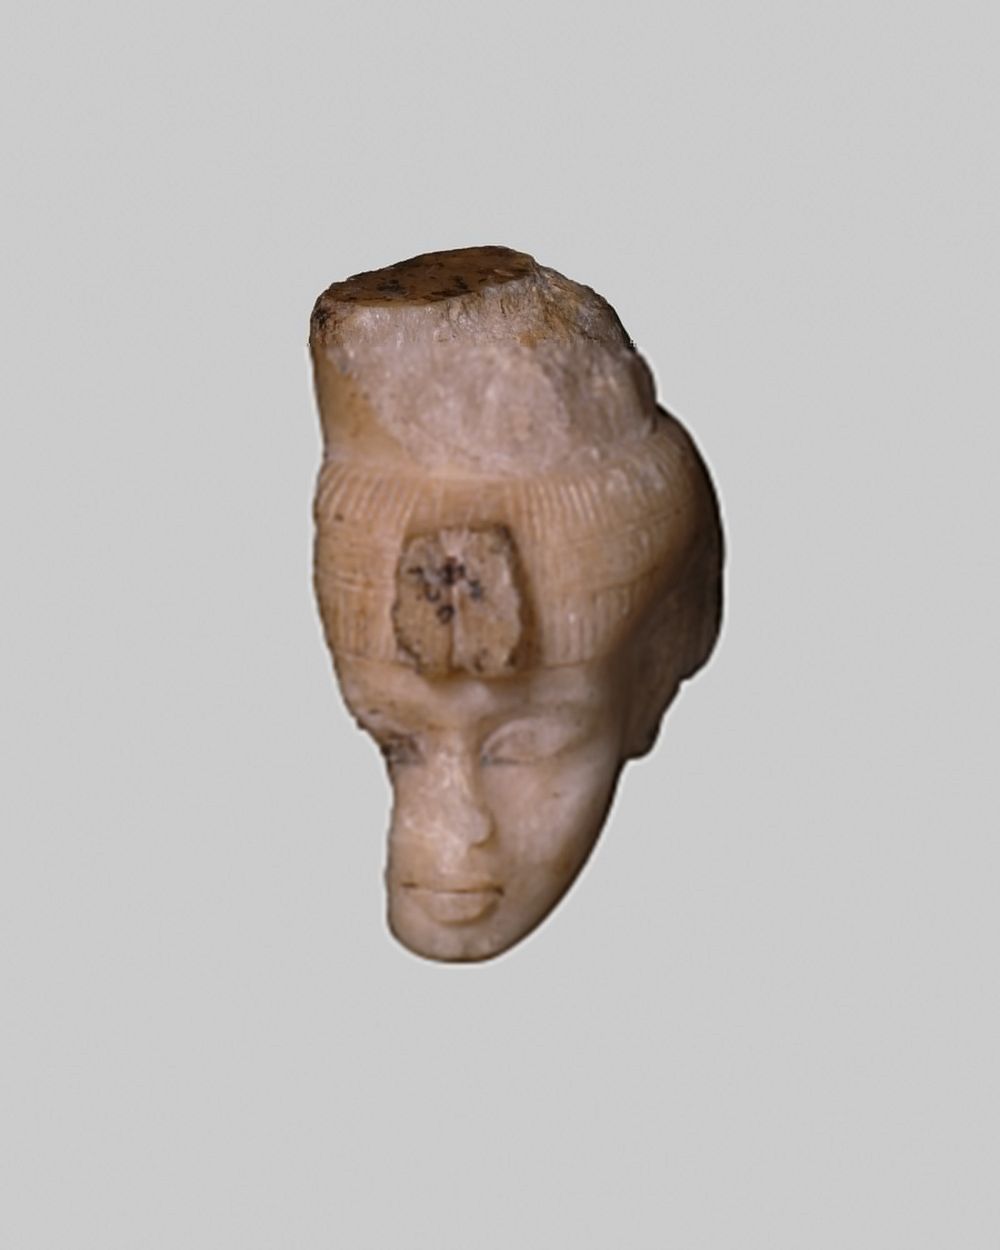 Head From a Shabti (Funerary Figurine) of Queen Tiye by Ancient Egyptian